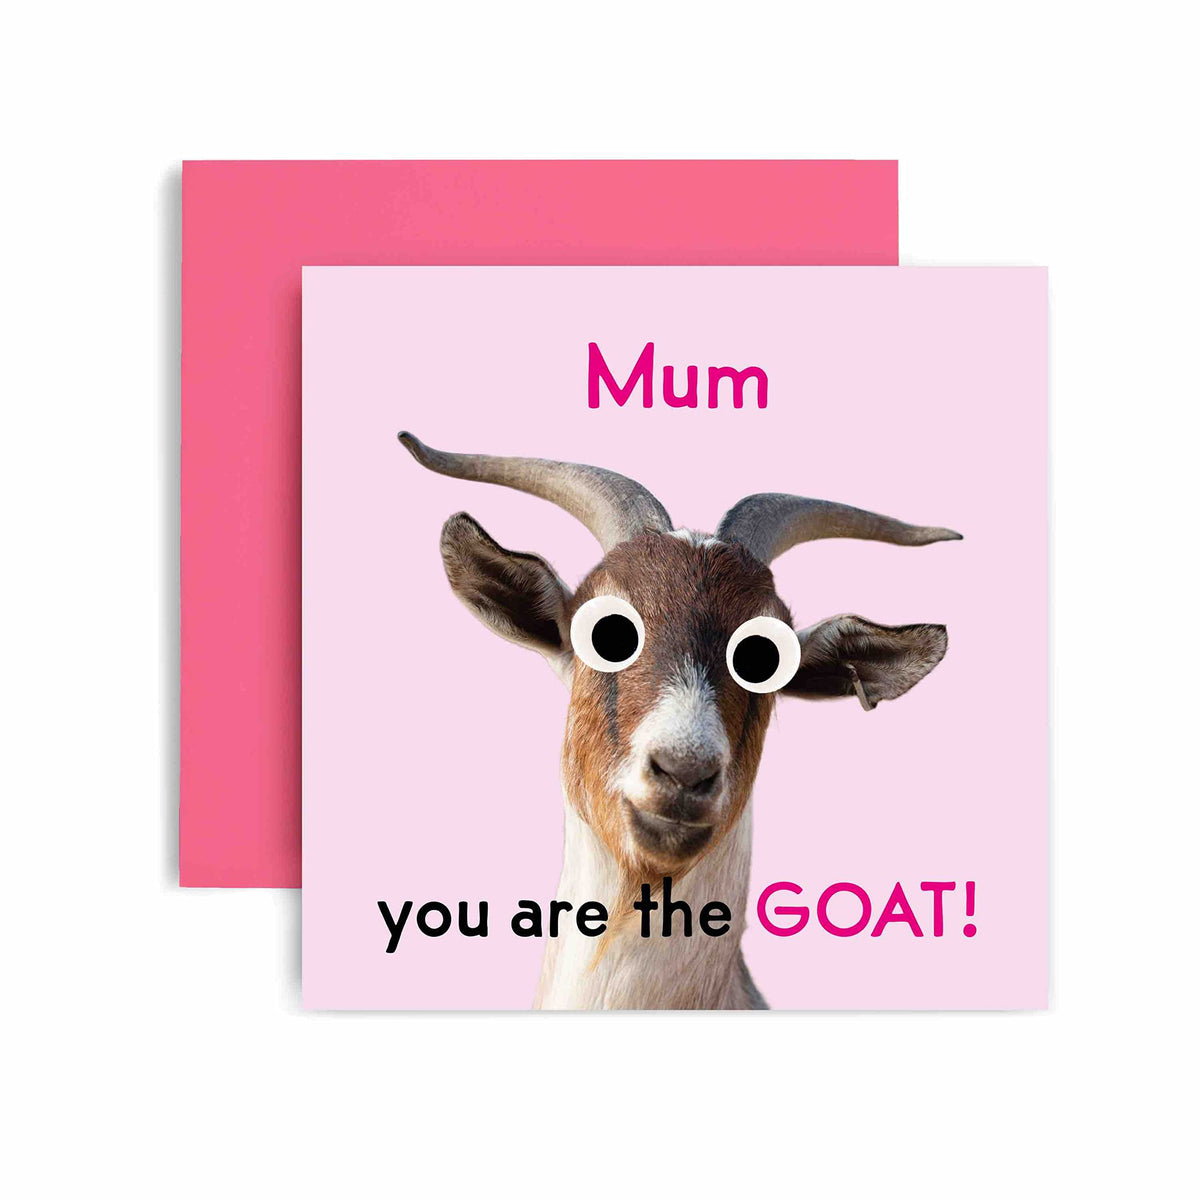 Huxters Birthday Cards for Women – You're the GOAT Mum Happy Birthday Card for Birthday, Mother’s Day – Mum Birthday Card with Lovely Pink Envelope – Funny Birthday Card (Mum)